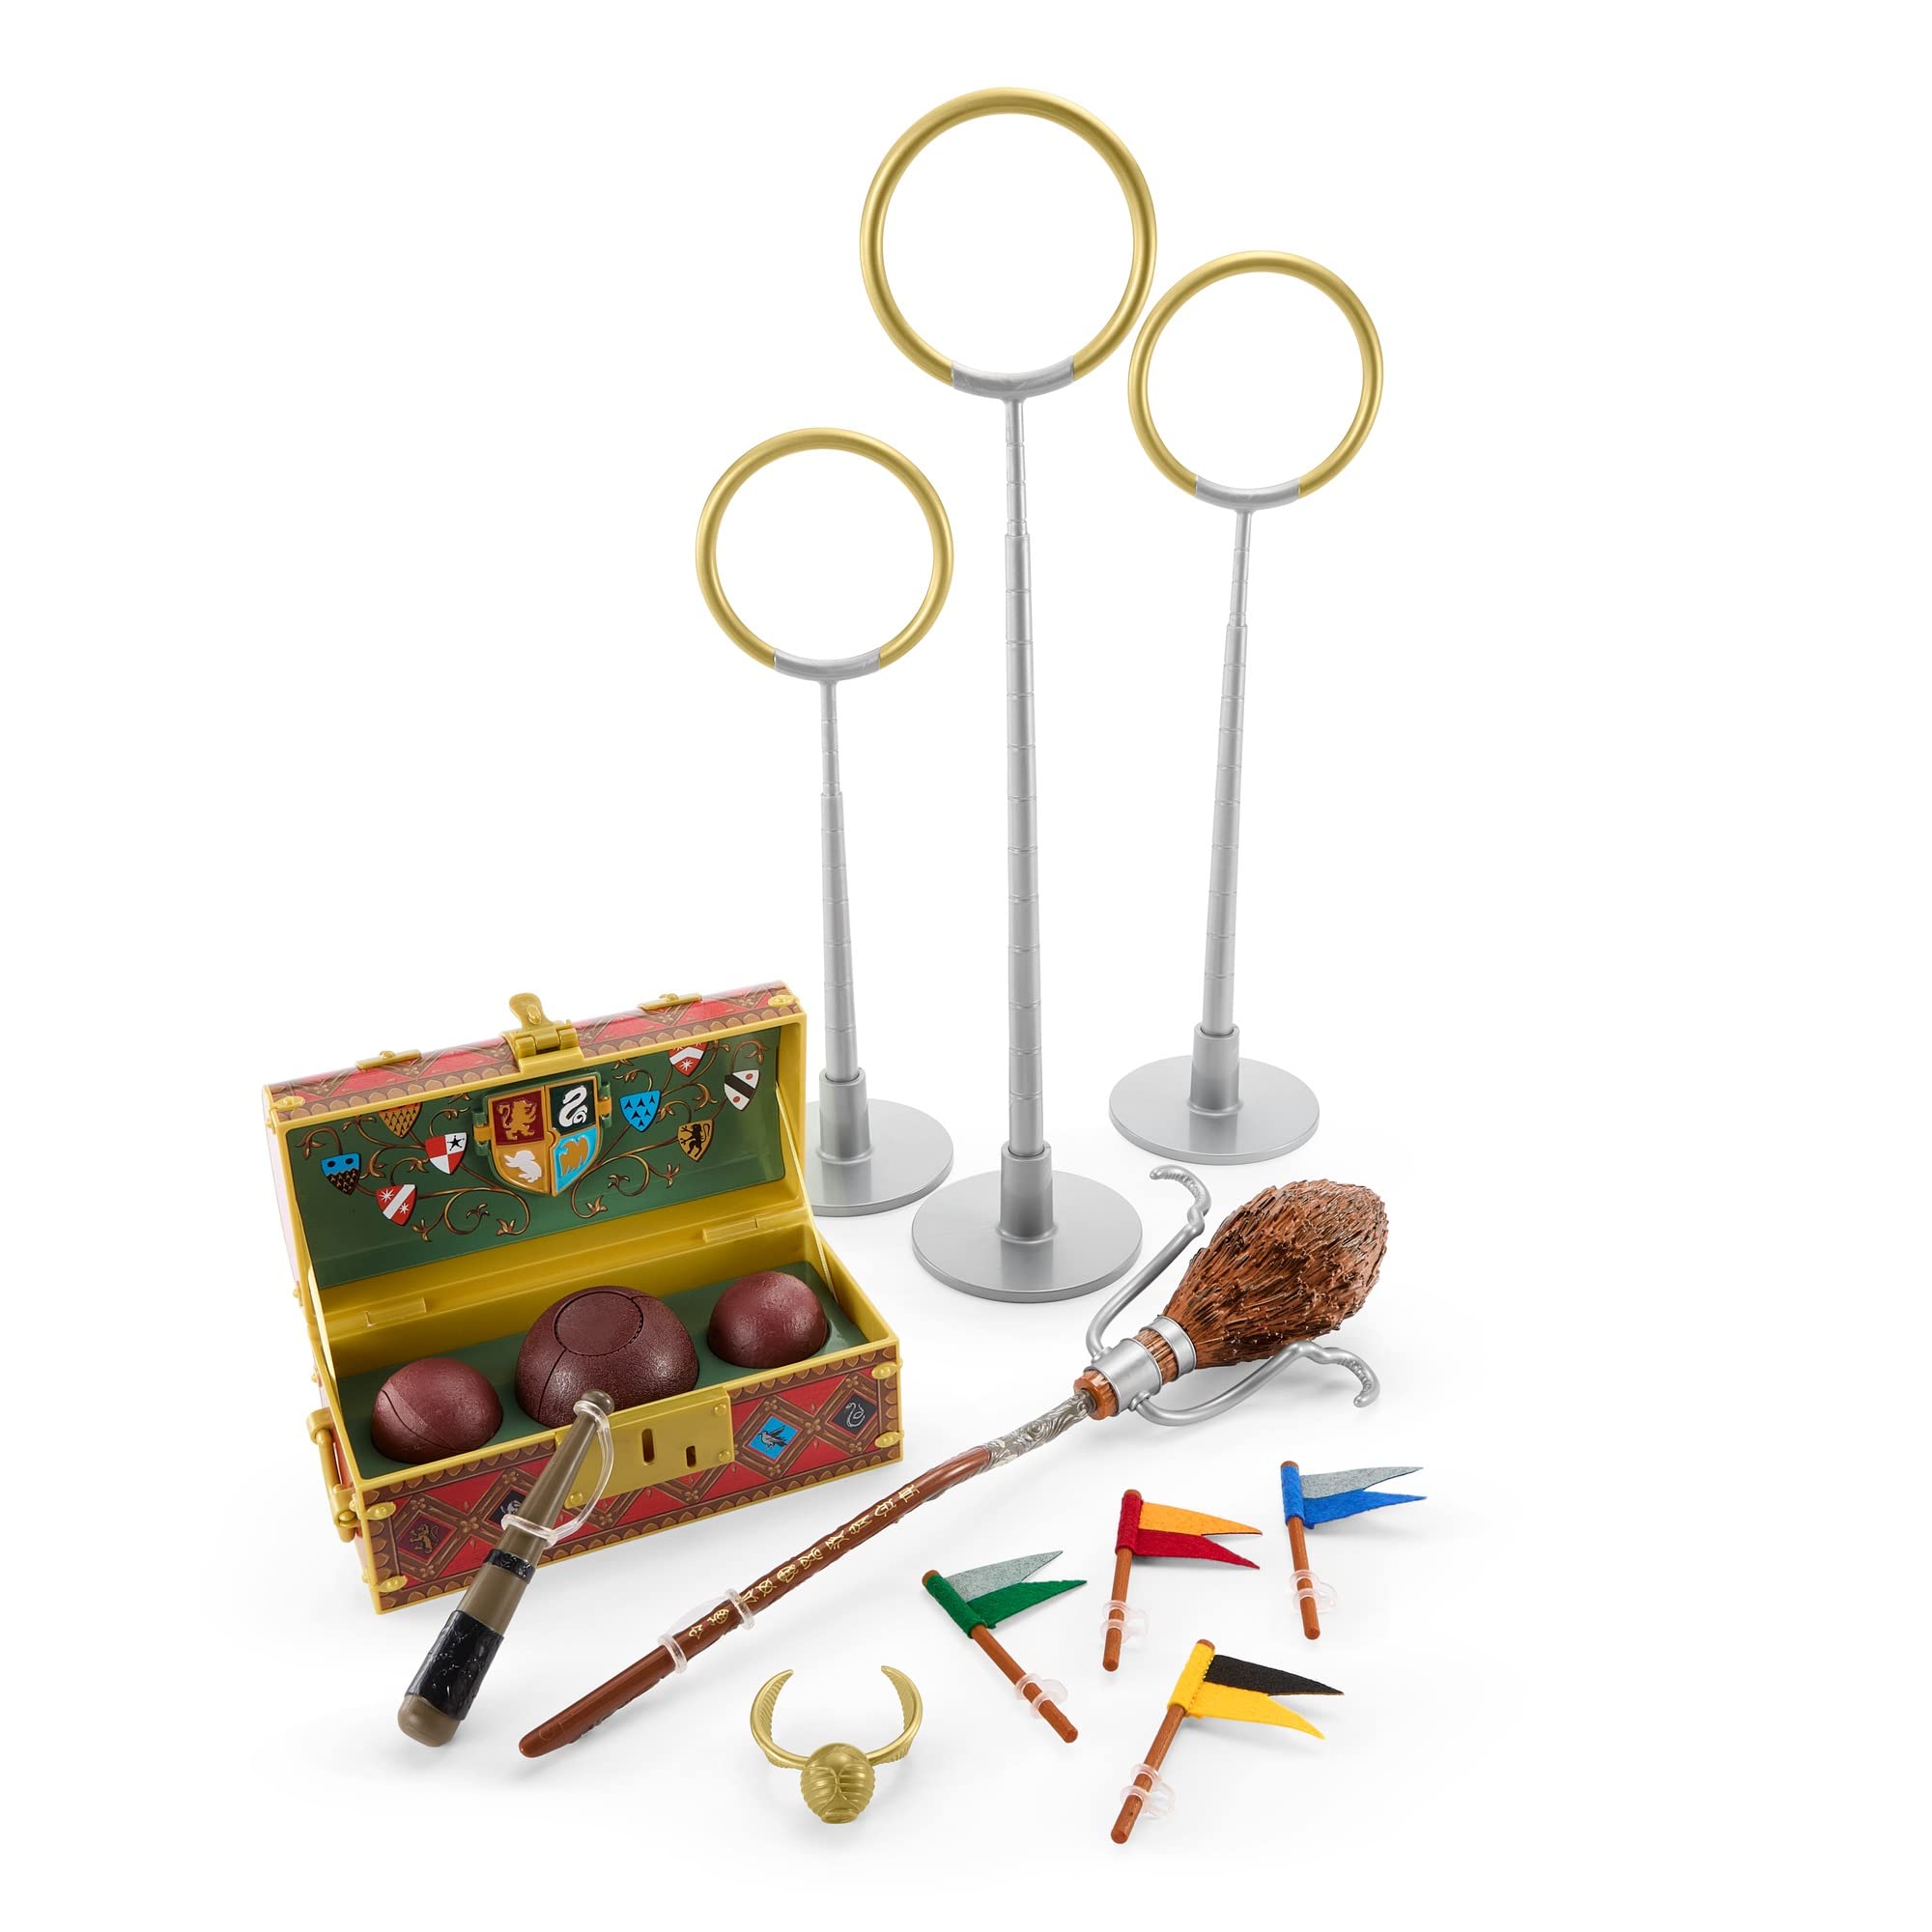 American Girl Harry Potter Hogwarts Quidditch 13-Piece Accessory Set with a Broomstick, Three Ring Goals, Golden Snitch, and House pennants: Gryffindor, Hufflepuff, Ravenclaw, and Slytherin